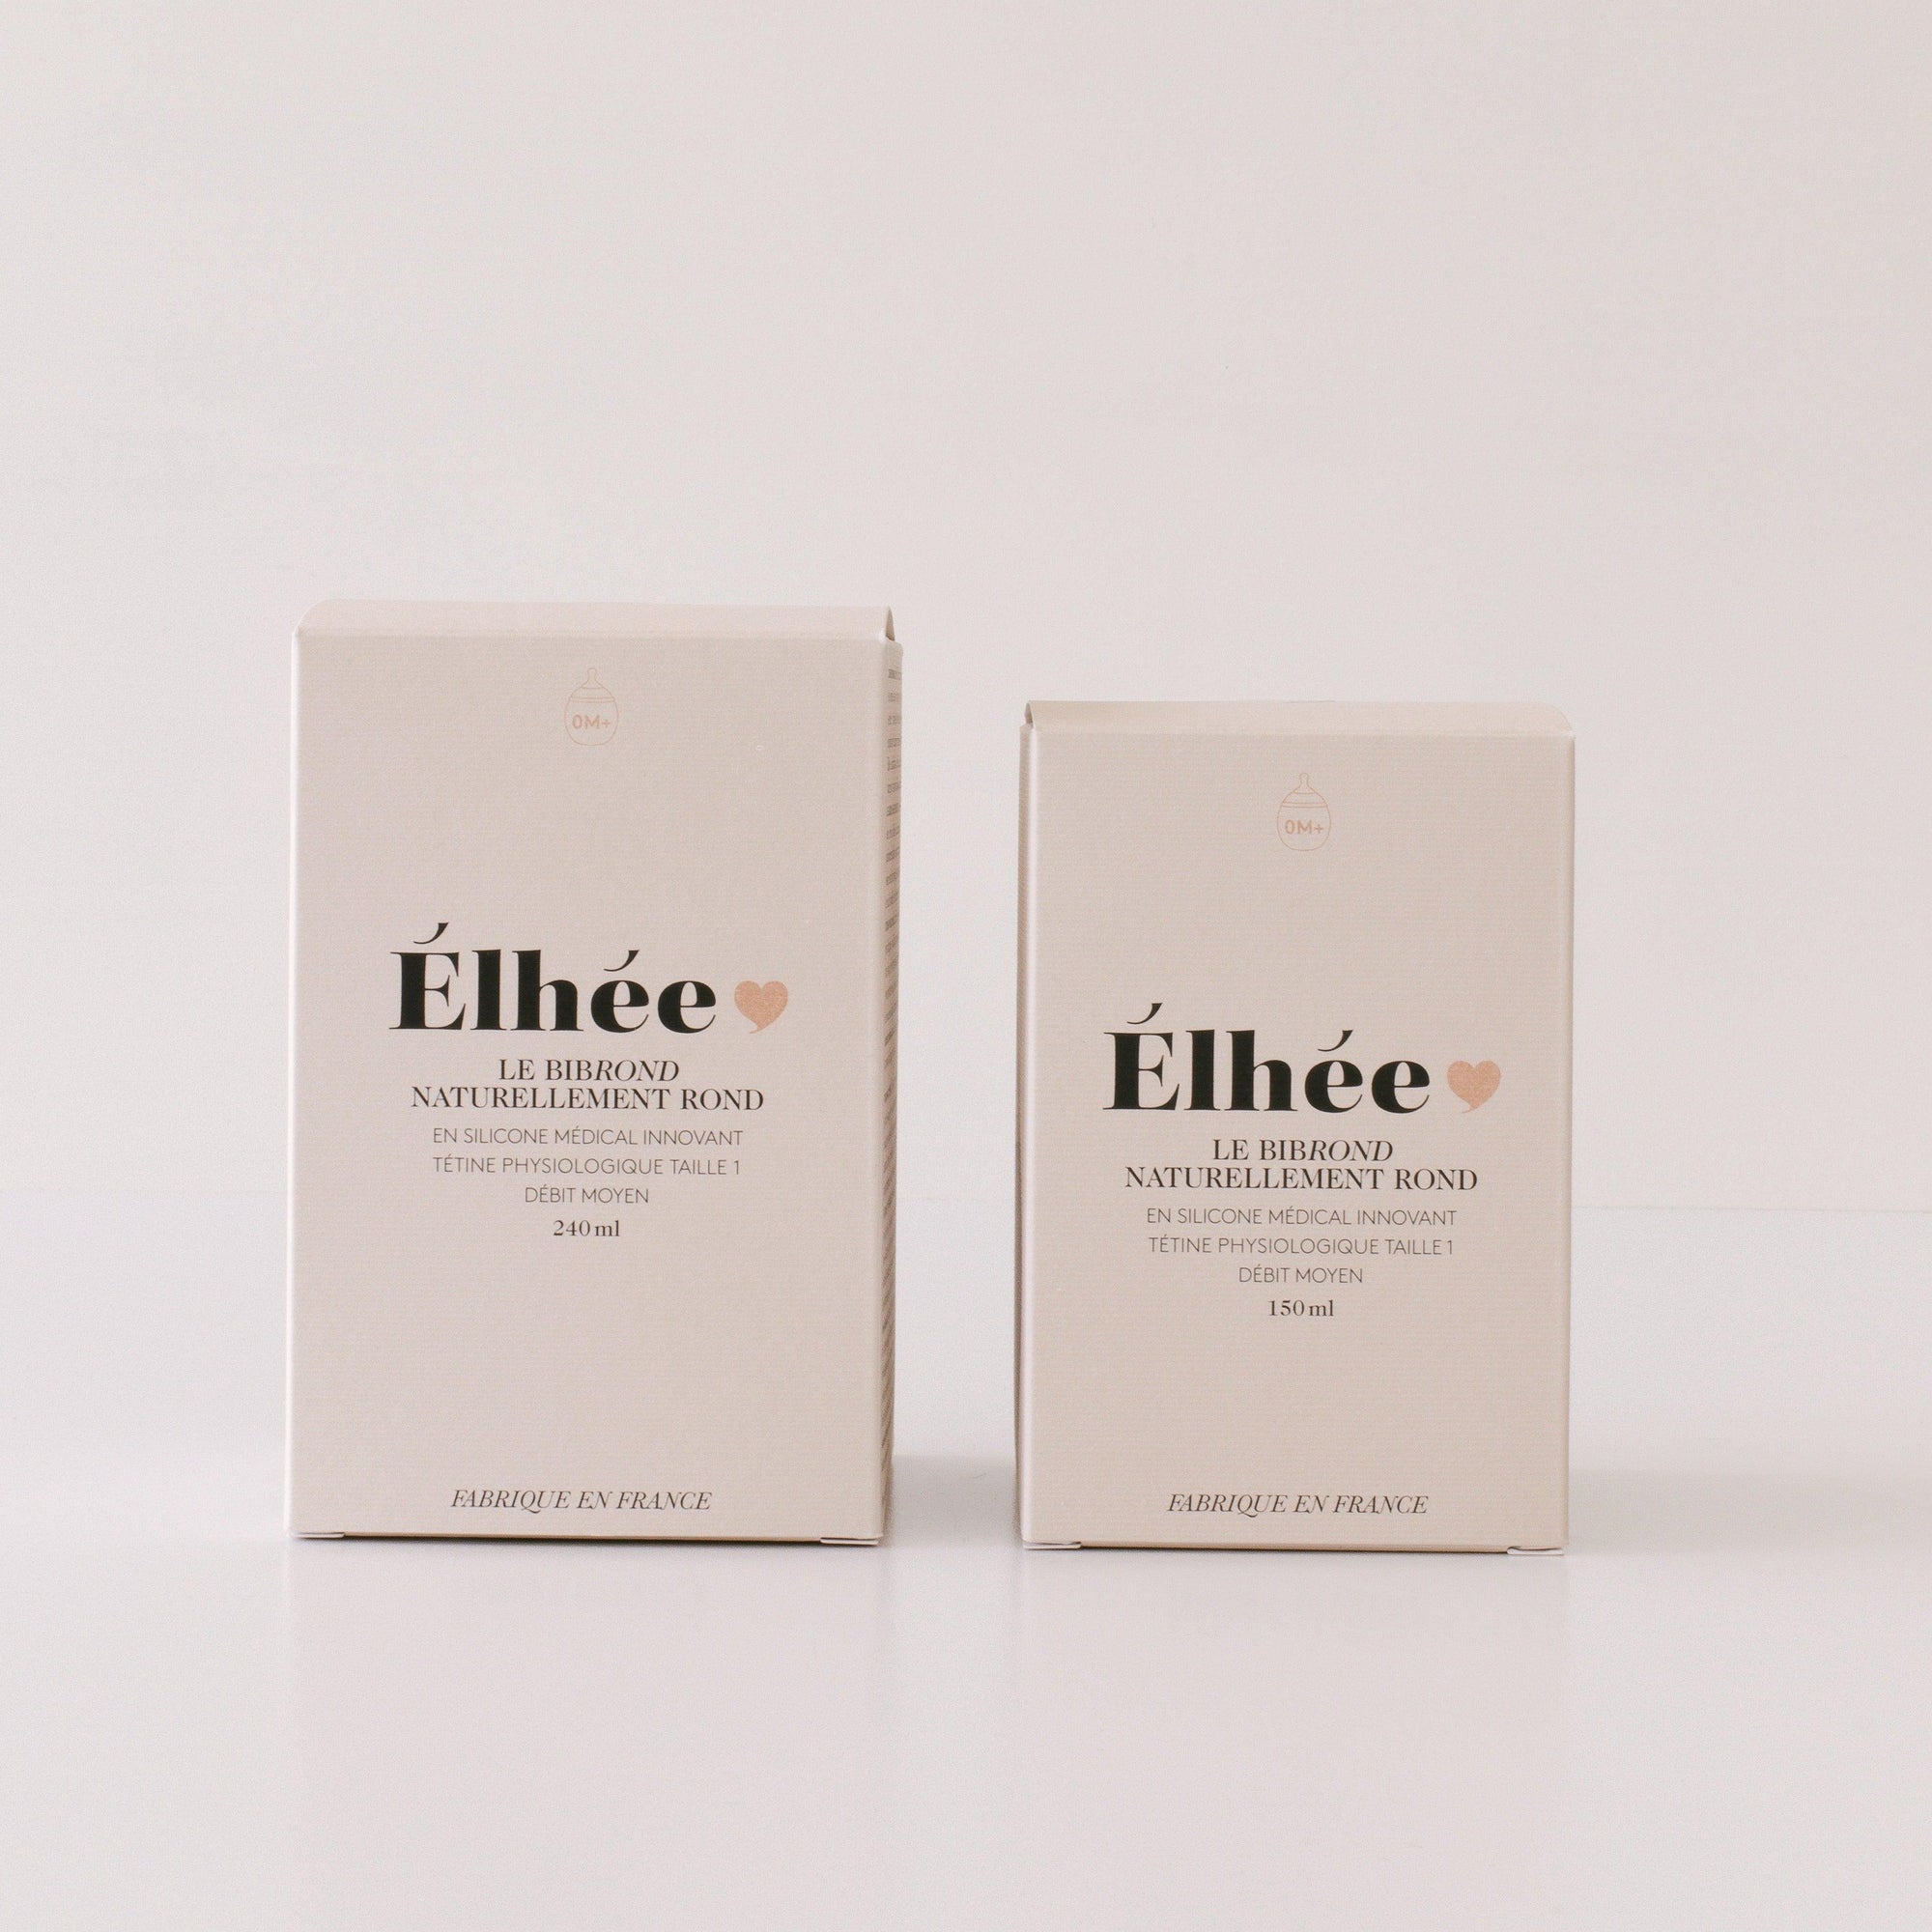 Two bibrond summer coral baby bottle boxes by Elhée France.